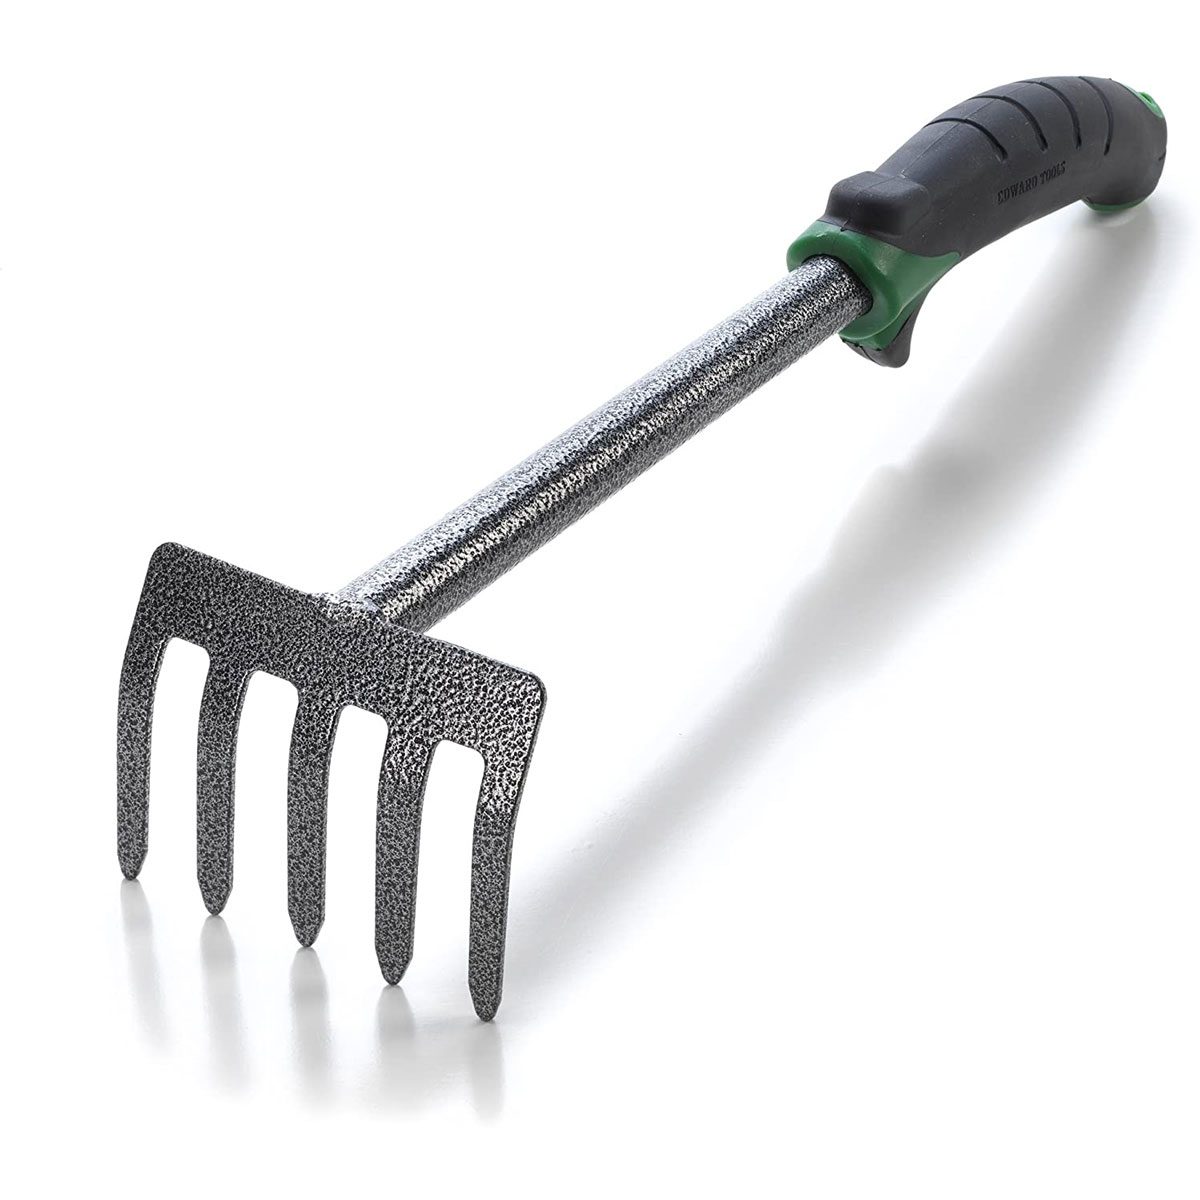 7 Best Garden Rakes for Cleaning Up Around Plants